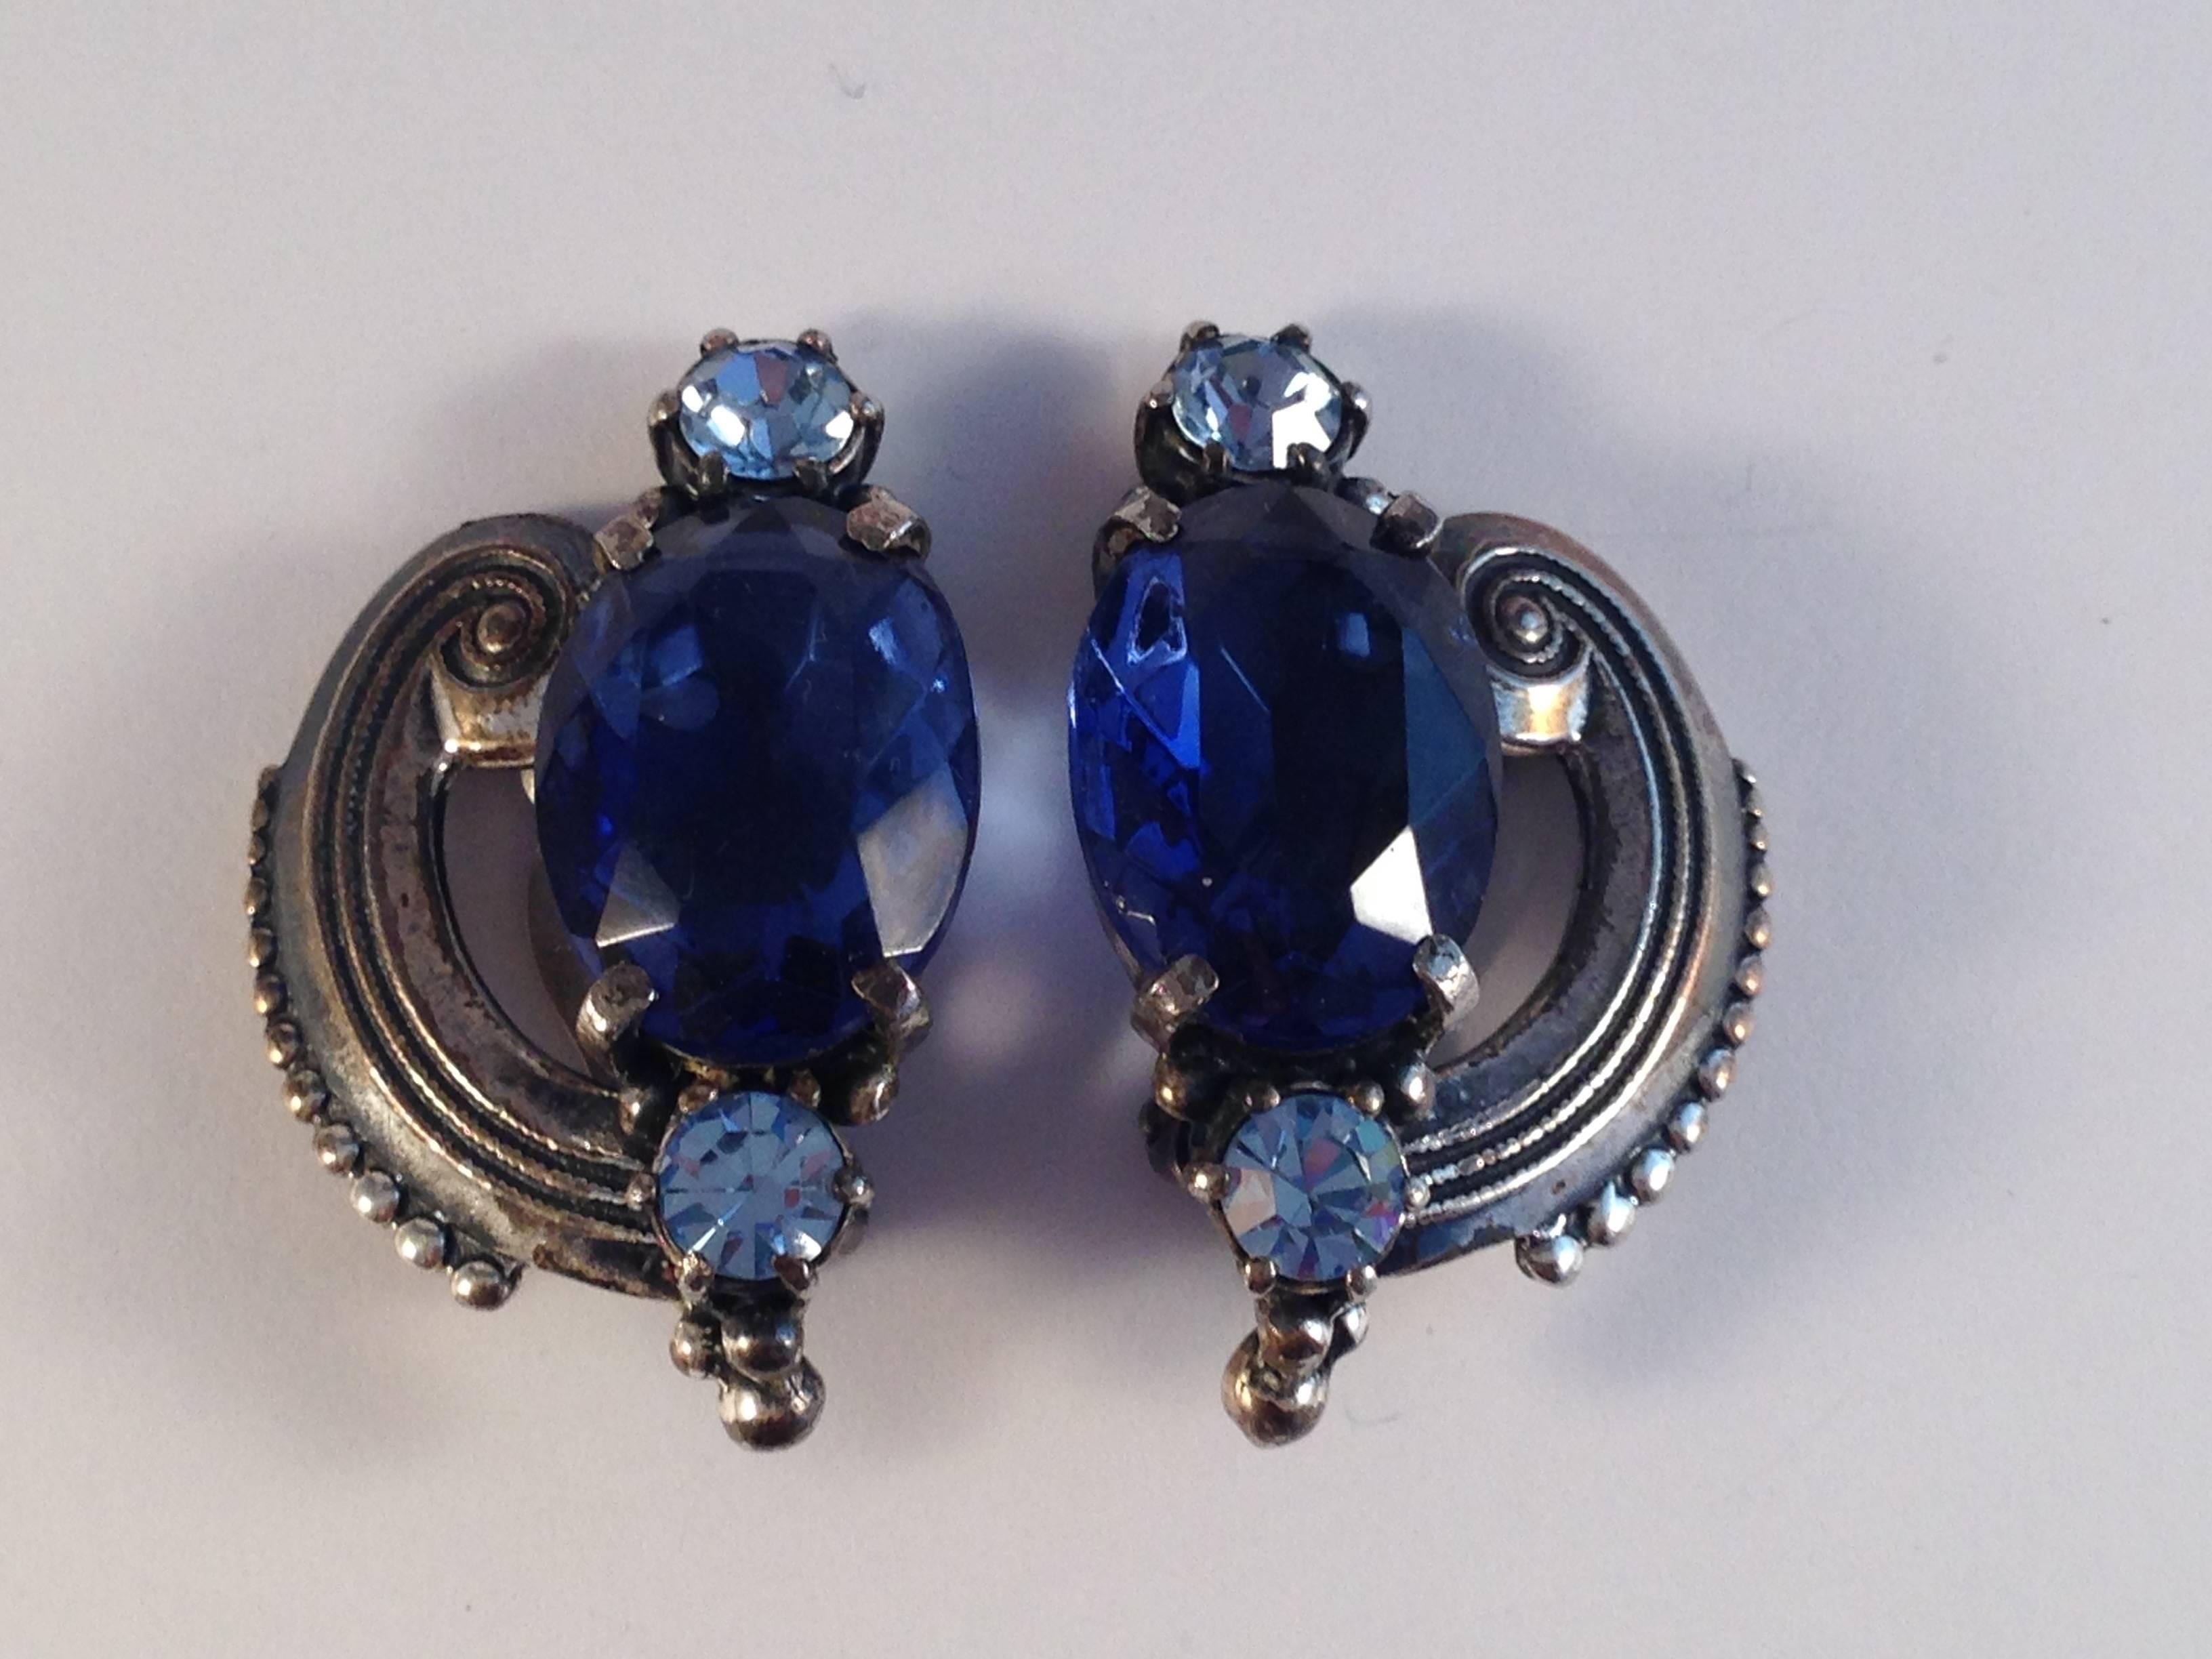 Schiaparelli Brooch and Earrings 1940s Silvertone and Blue Stones  For Sale 1